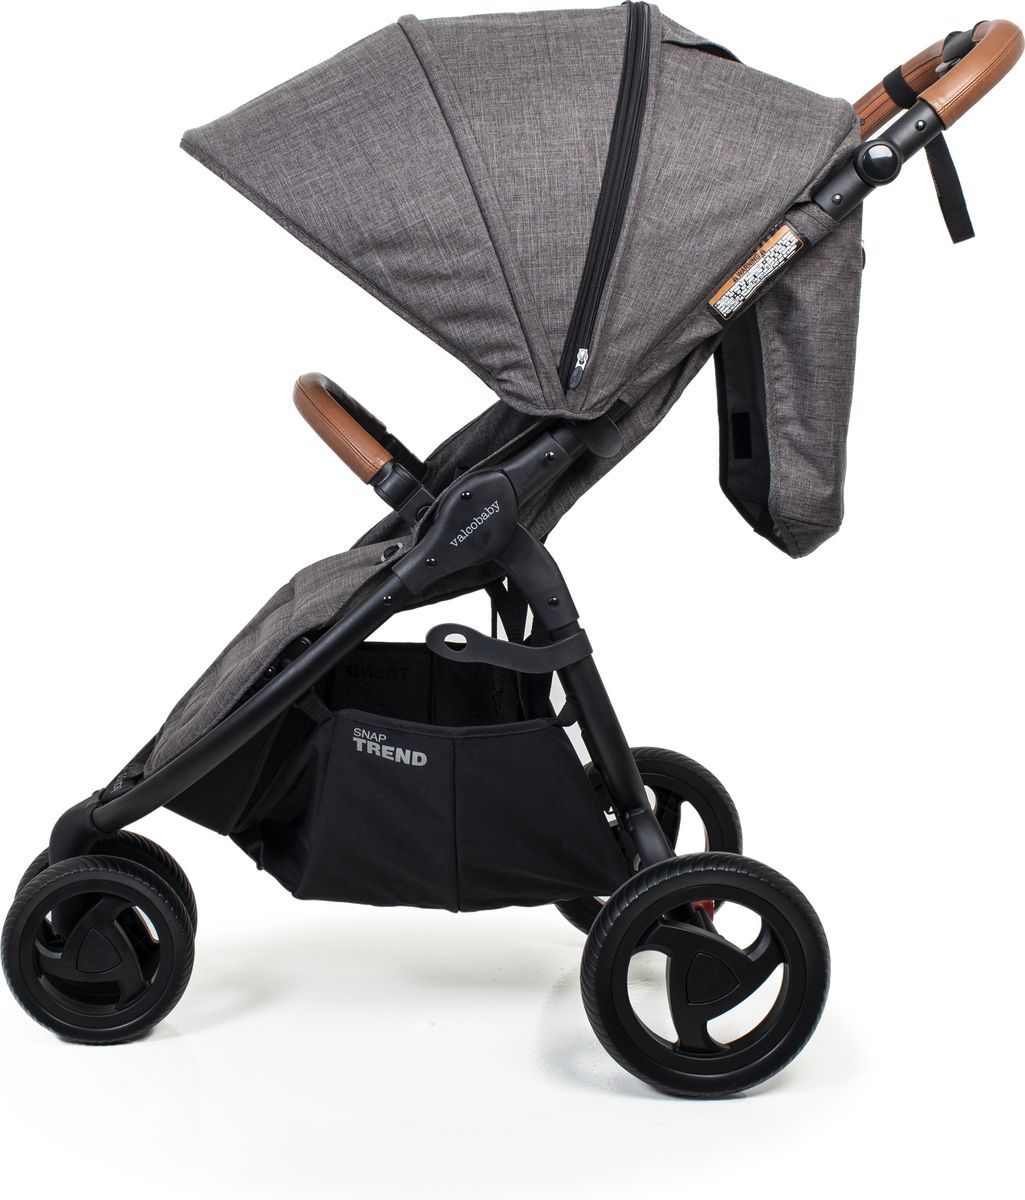   Valco Baby Snap Trend Charcoal